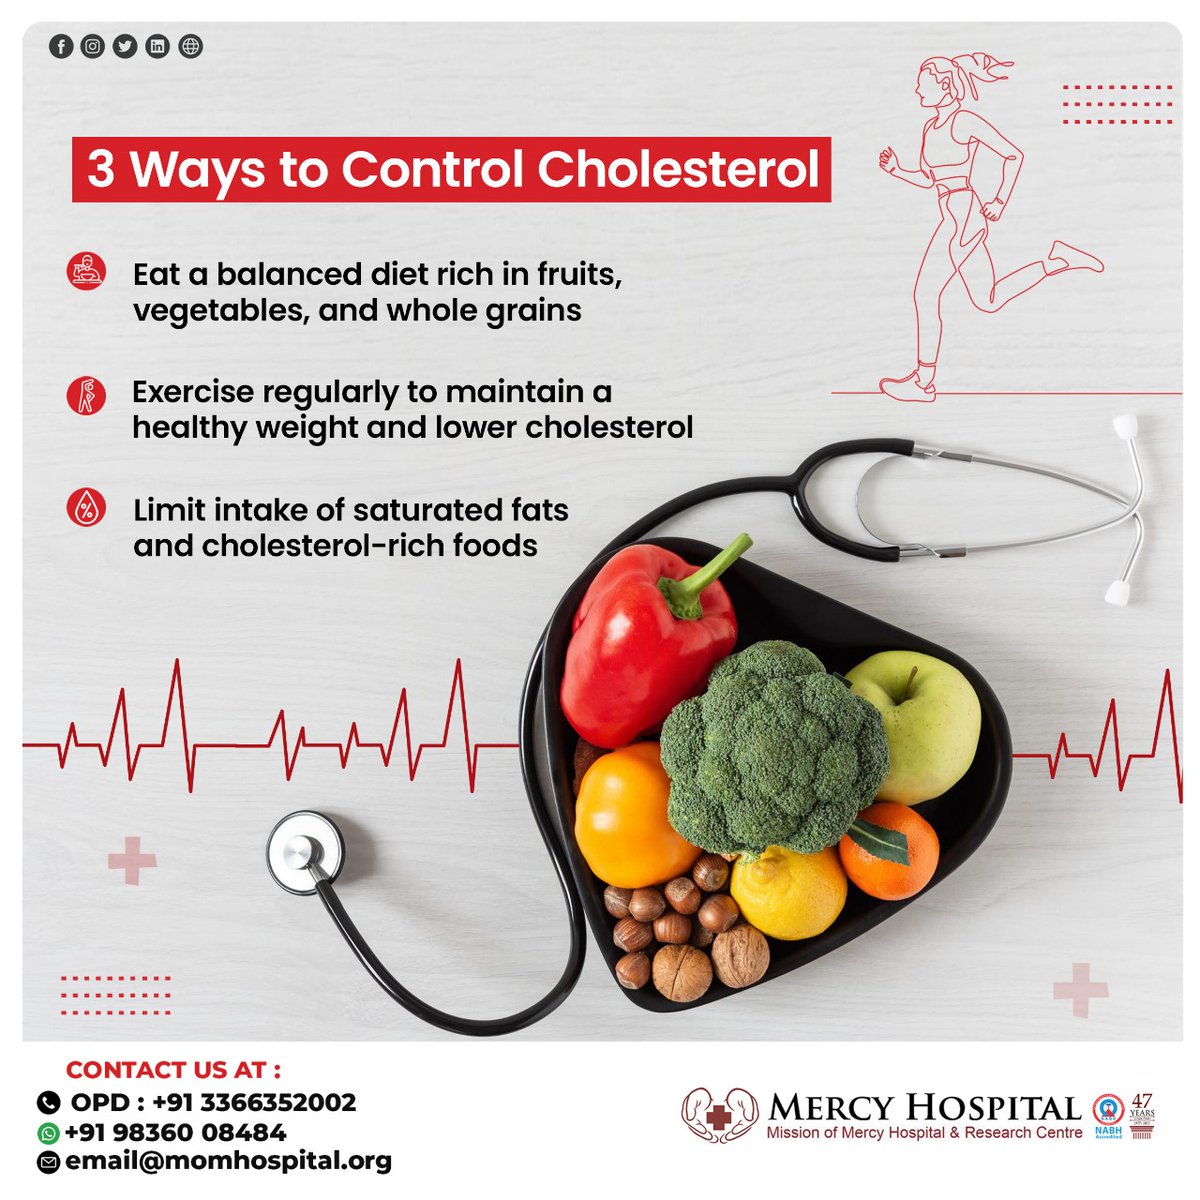 Keep your heart happy and healthy by mastering cholesterol control with simple steps. Here's to a healthier you!

#MercyHospital #CompassionWithExcellence #CompassionWithMercyHospital #CholesterolControl #HealthyHeart #HealthyLiving #ExerciseRoutine